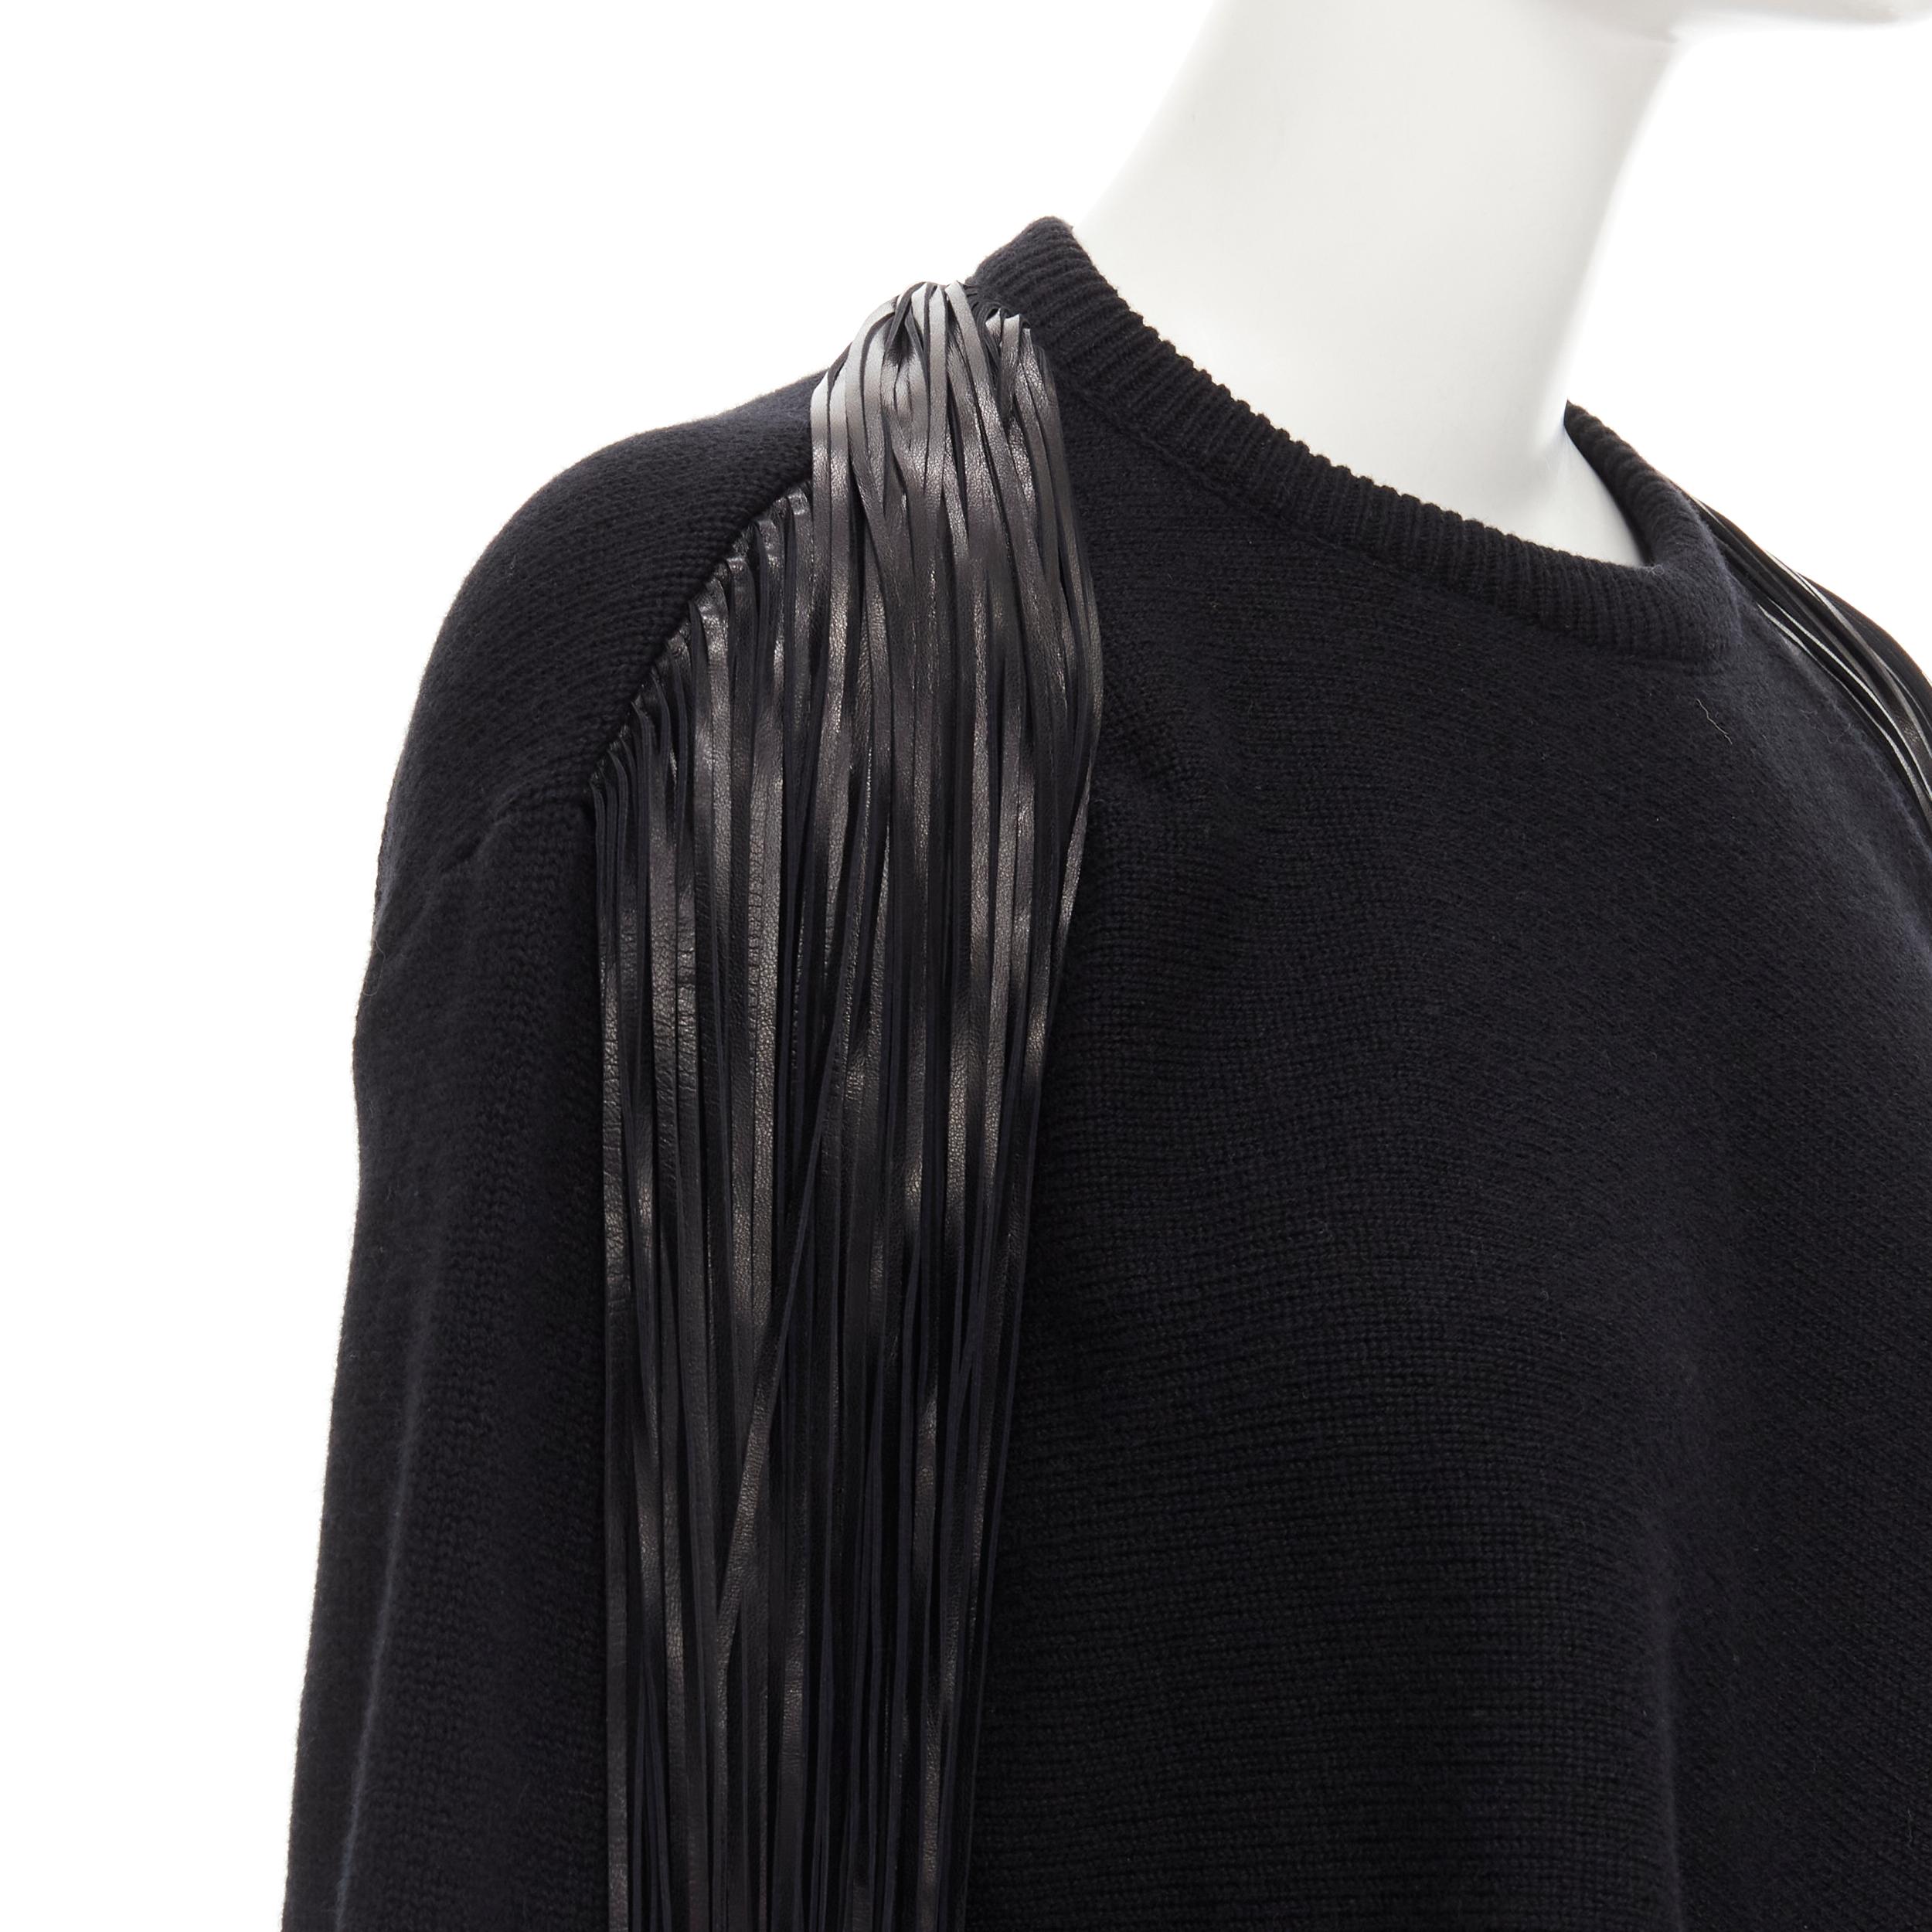 VALENTINO black virgin wool cashmere leather fringe wrap scarf sweater M 
Reference: AEMA/A00060 
Brand: Valentino 
Material: Wool 
Color: Black 
Pattern: Solid 
Extra Detail: Leather fringe trim at back. Attached scarf that can be draped at front